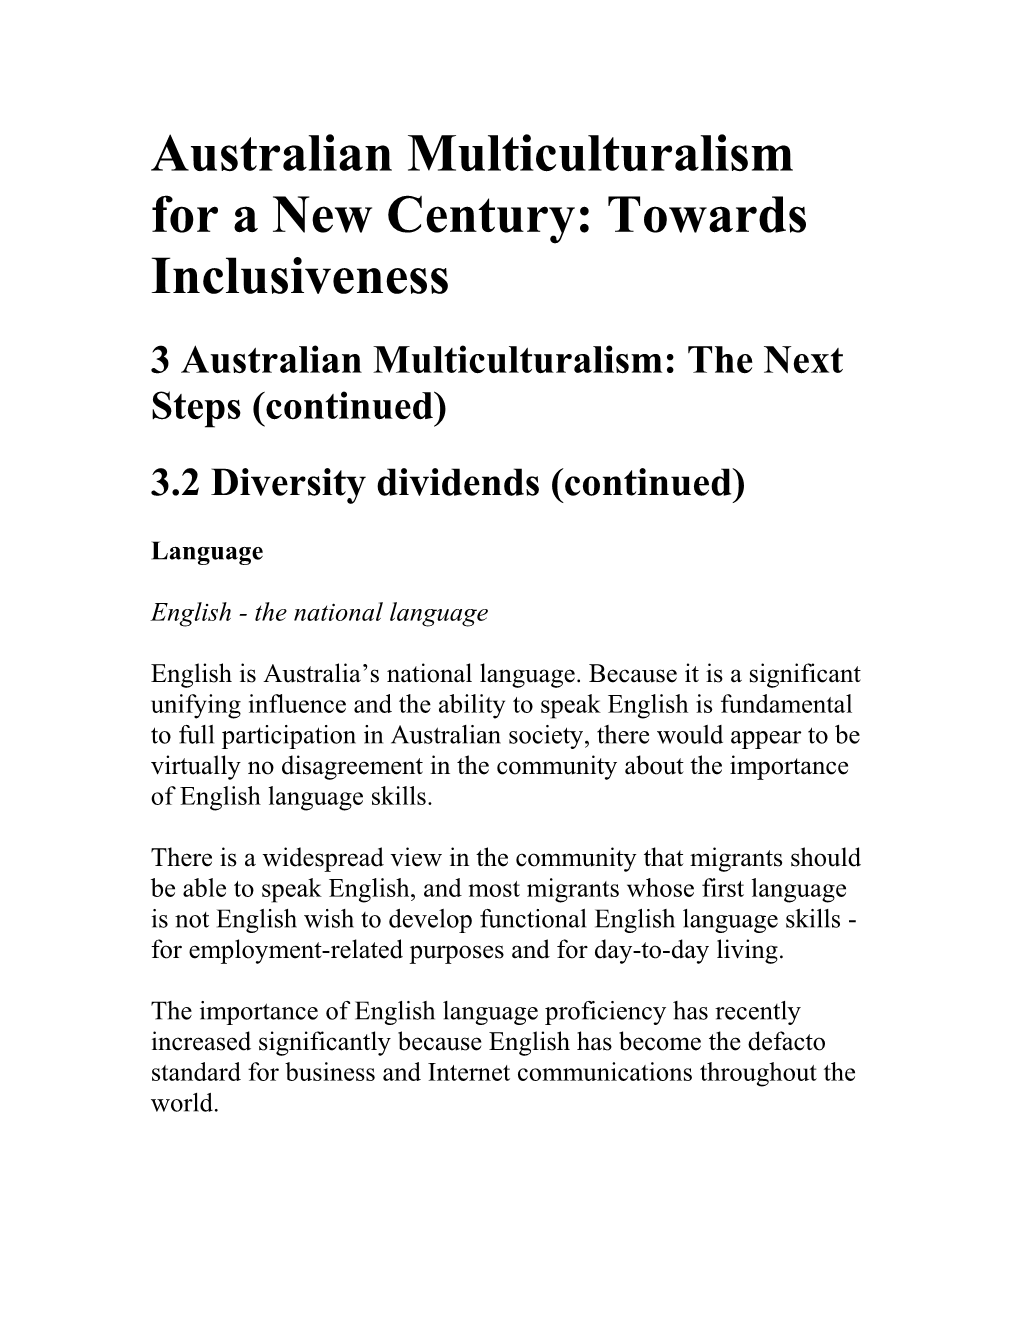 Australian Multiculturalism for a New Century: Towards Inclusiveness